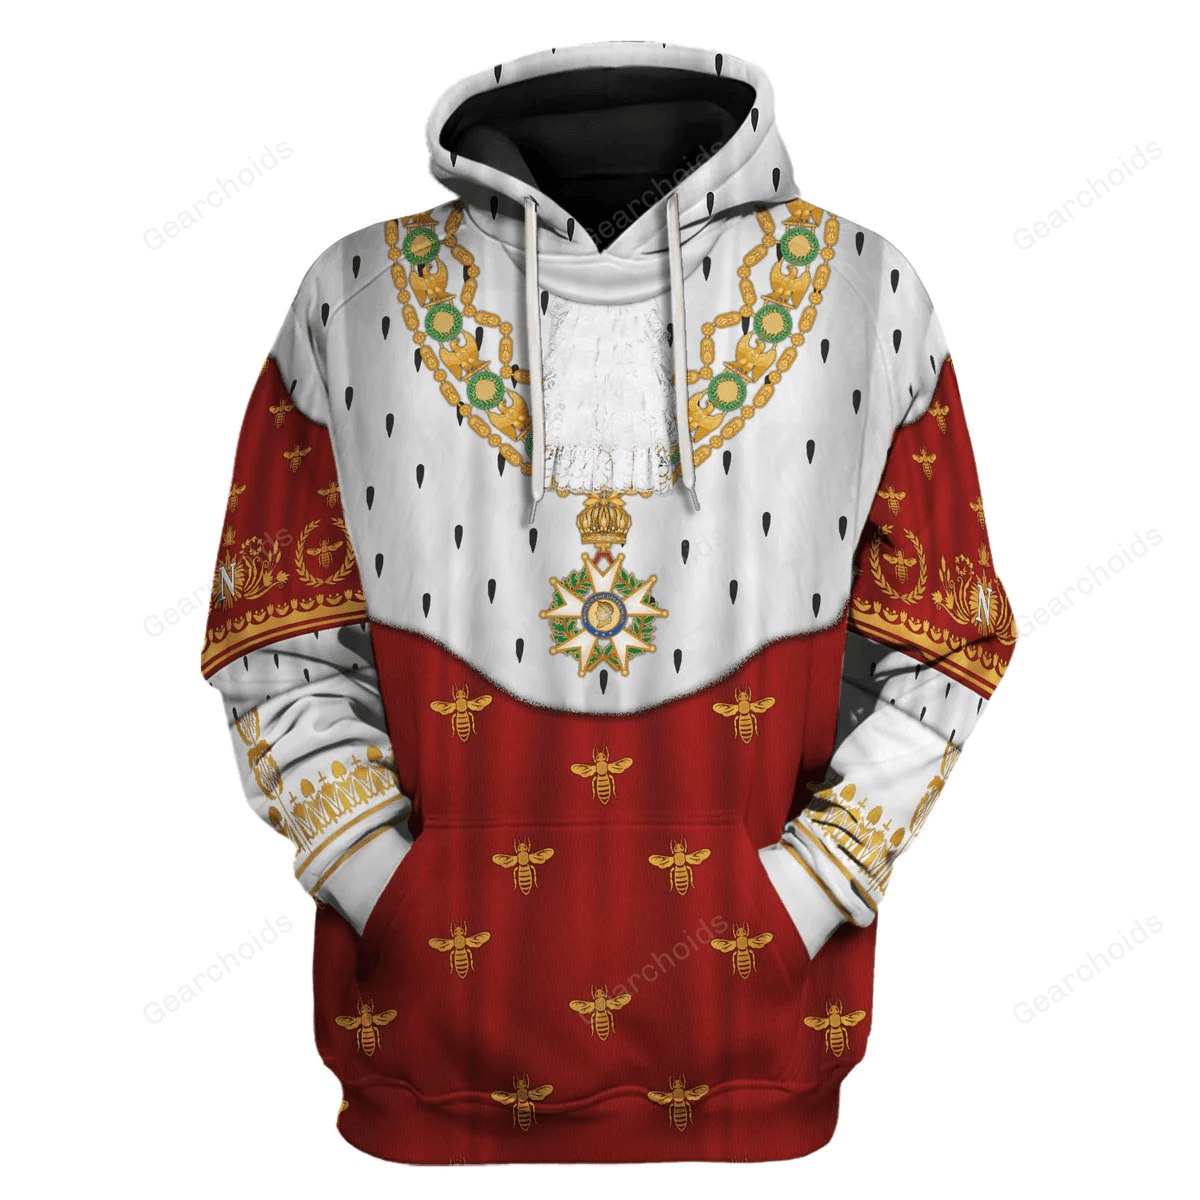 Gearchoids Napoleon I in Coronation Robes Costume All Over Print Hoodie Sweatshirt T-Shirt Tracksuit